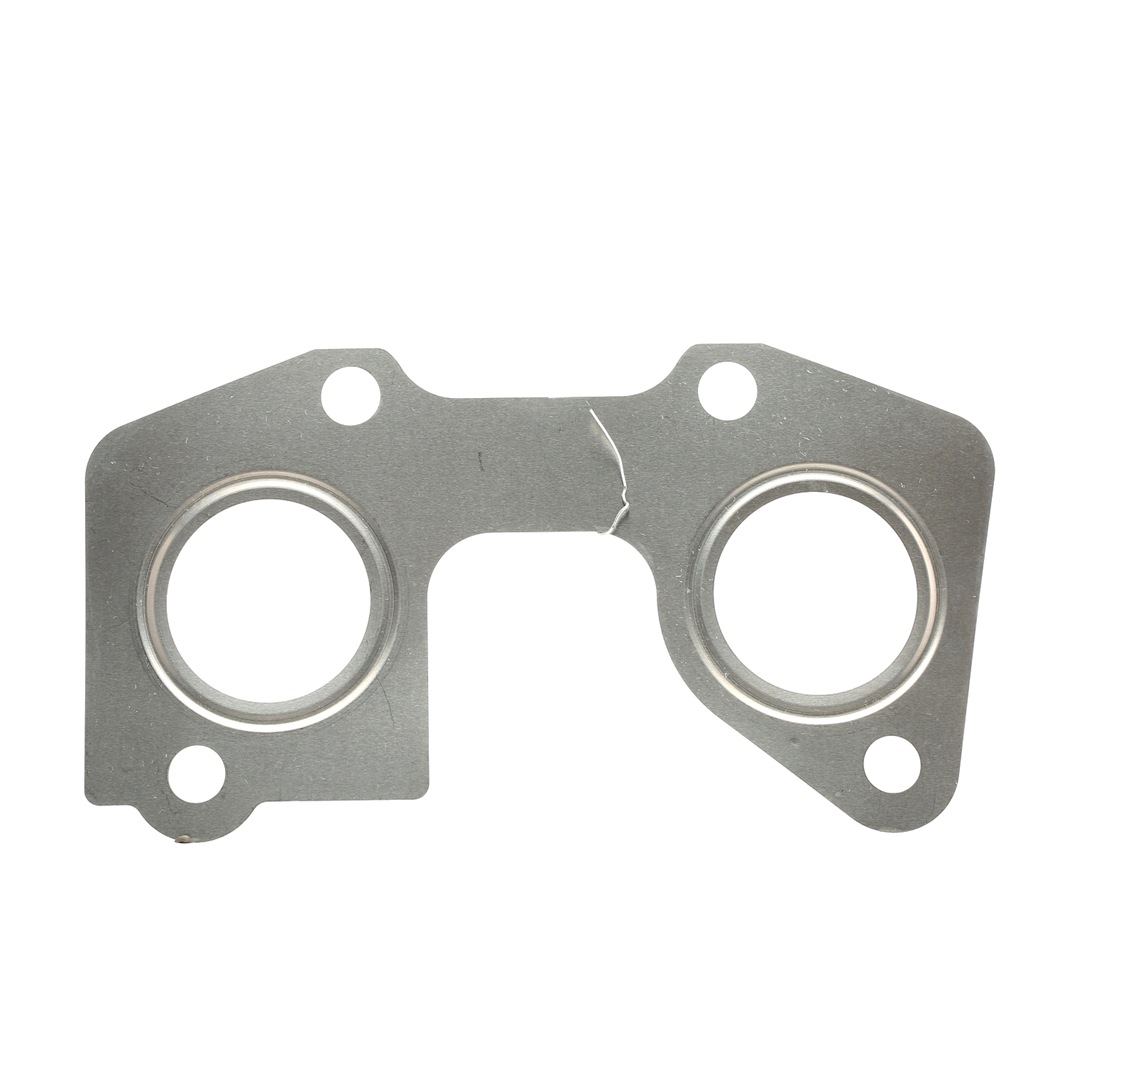 Peugeot Exhaust manifold gasket SASIC 3490A60 at a good price